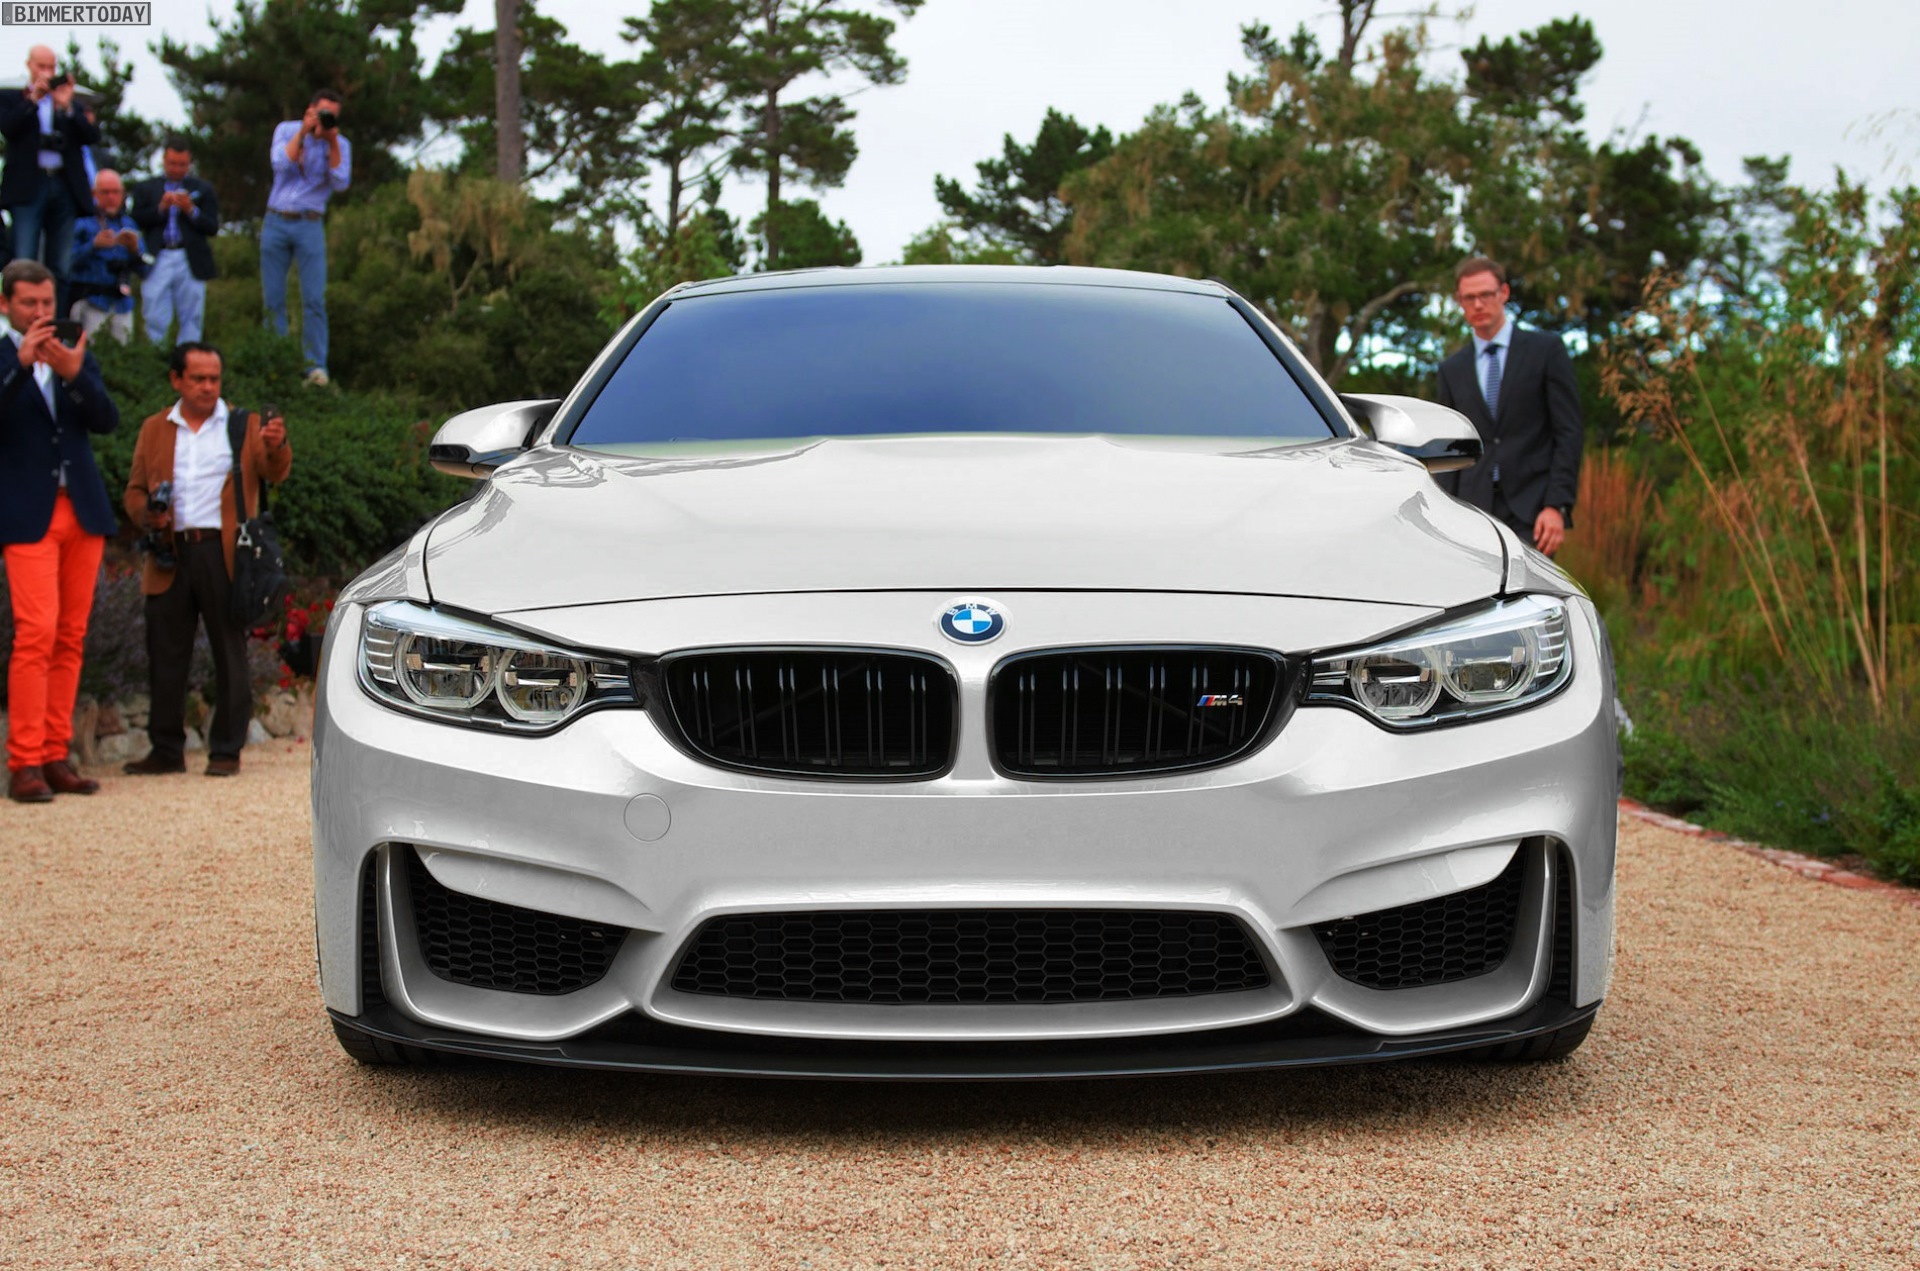 Grey Bmw M4 Wallpaper And Image Pictures Photos